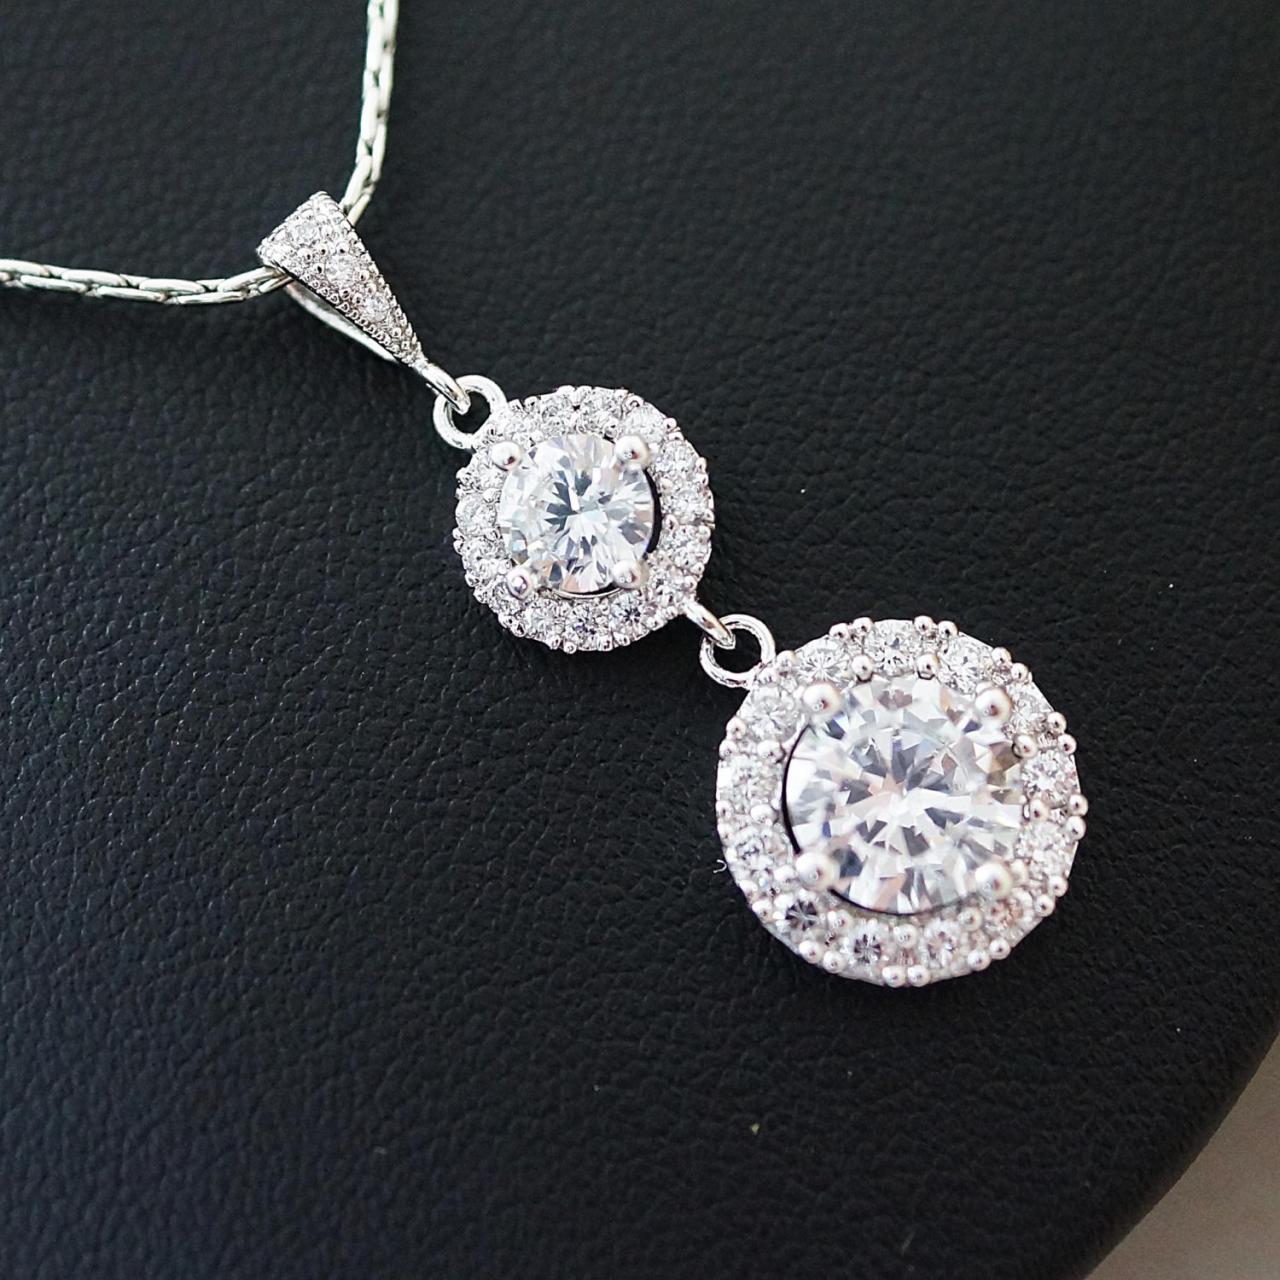 Wedding Jewelry Bridal Jewelry Bridal Necklace Clear White Lux Cubic Zirconia Halo Style Round Drop Necklace